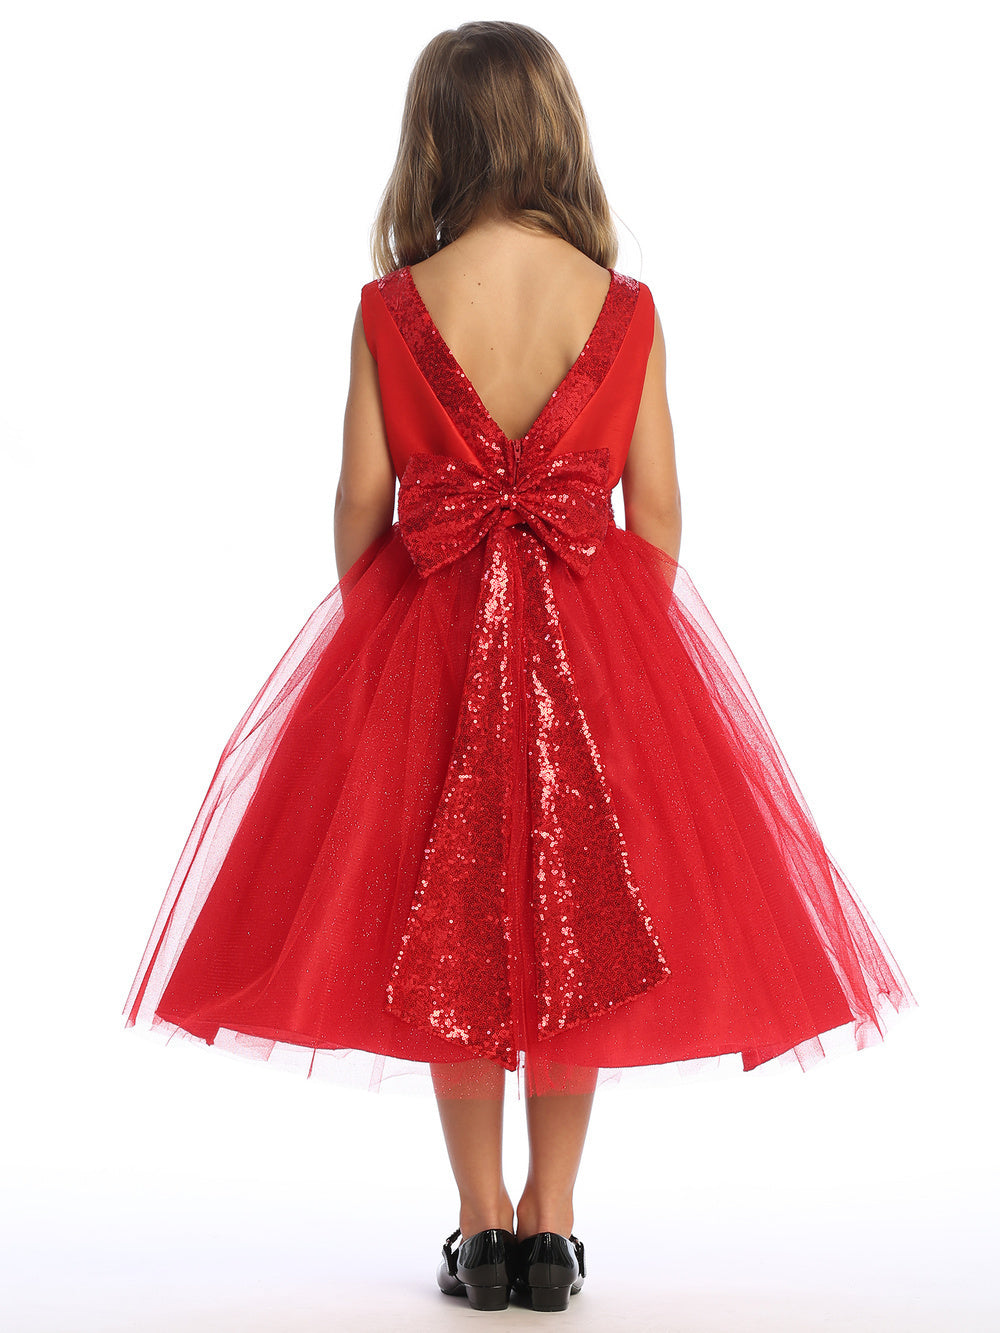 Resplendent in red, flower girl adorned in shantung dress with sparkle tulle and sequins.